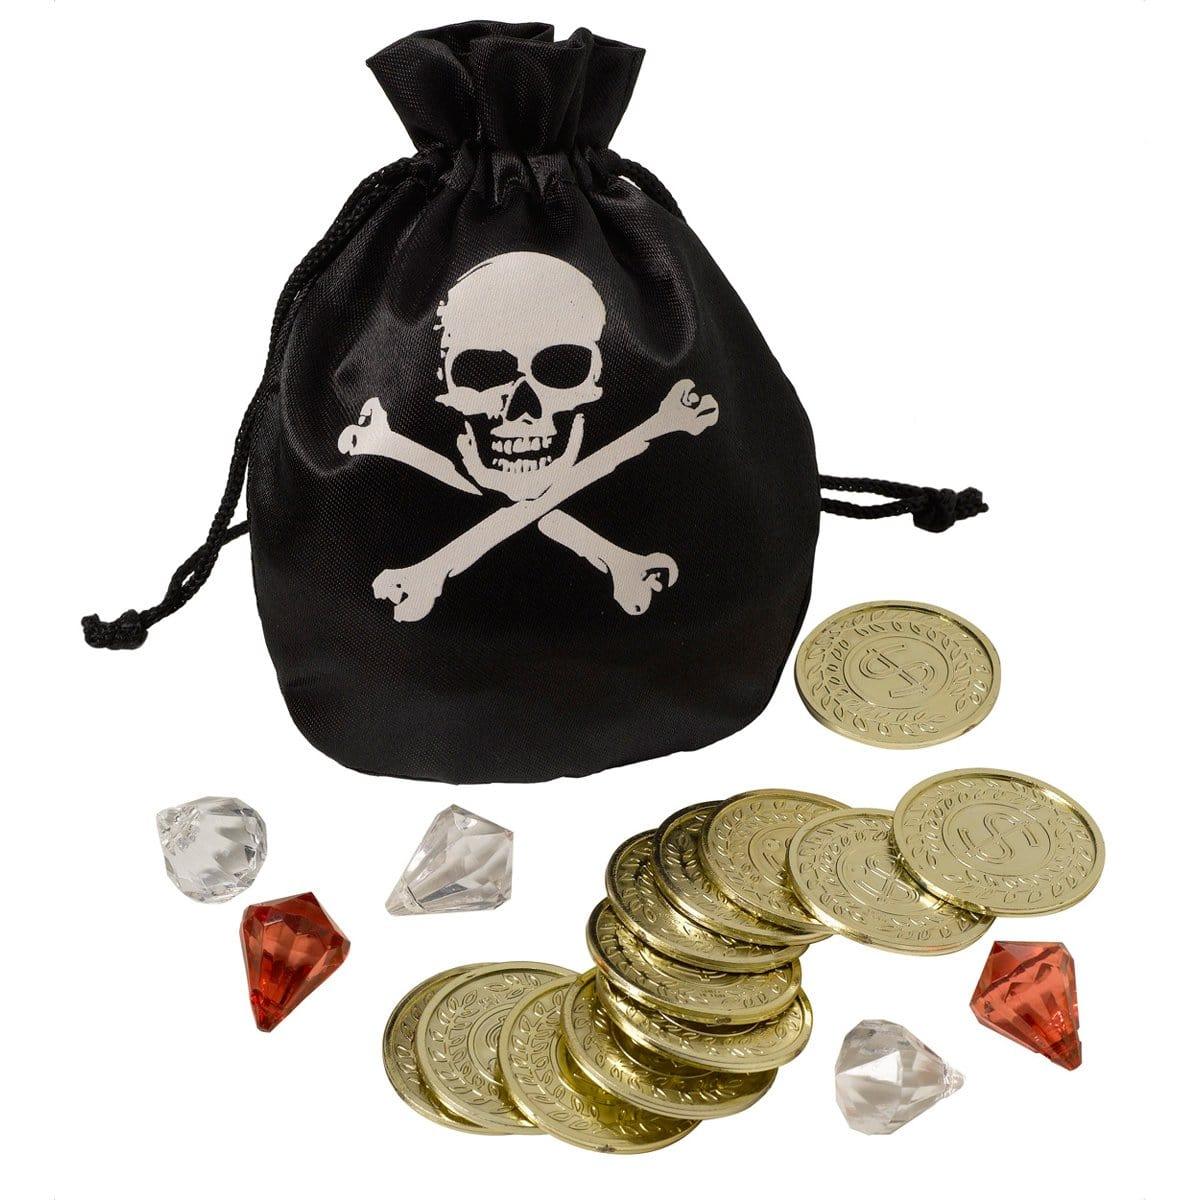 Buy Costume Accessories Pirate pouch & coins set sold at Party Expert